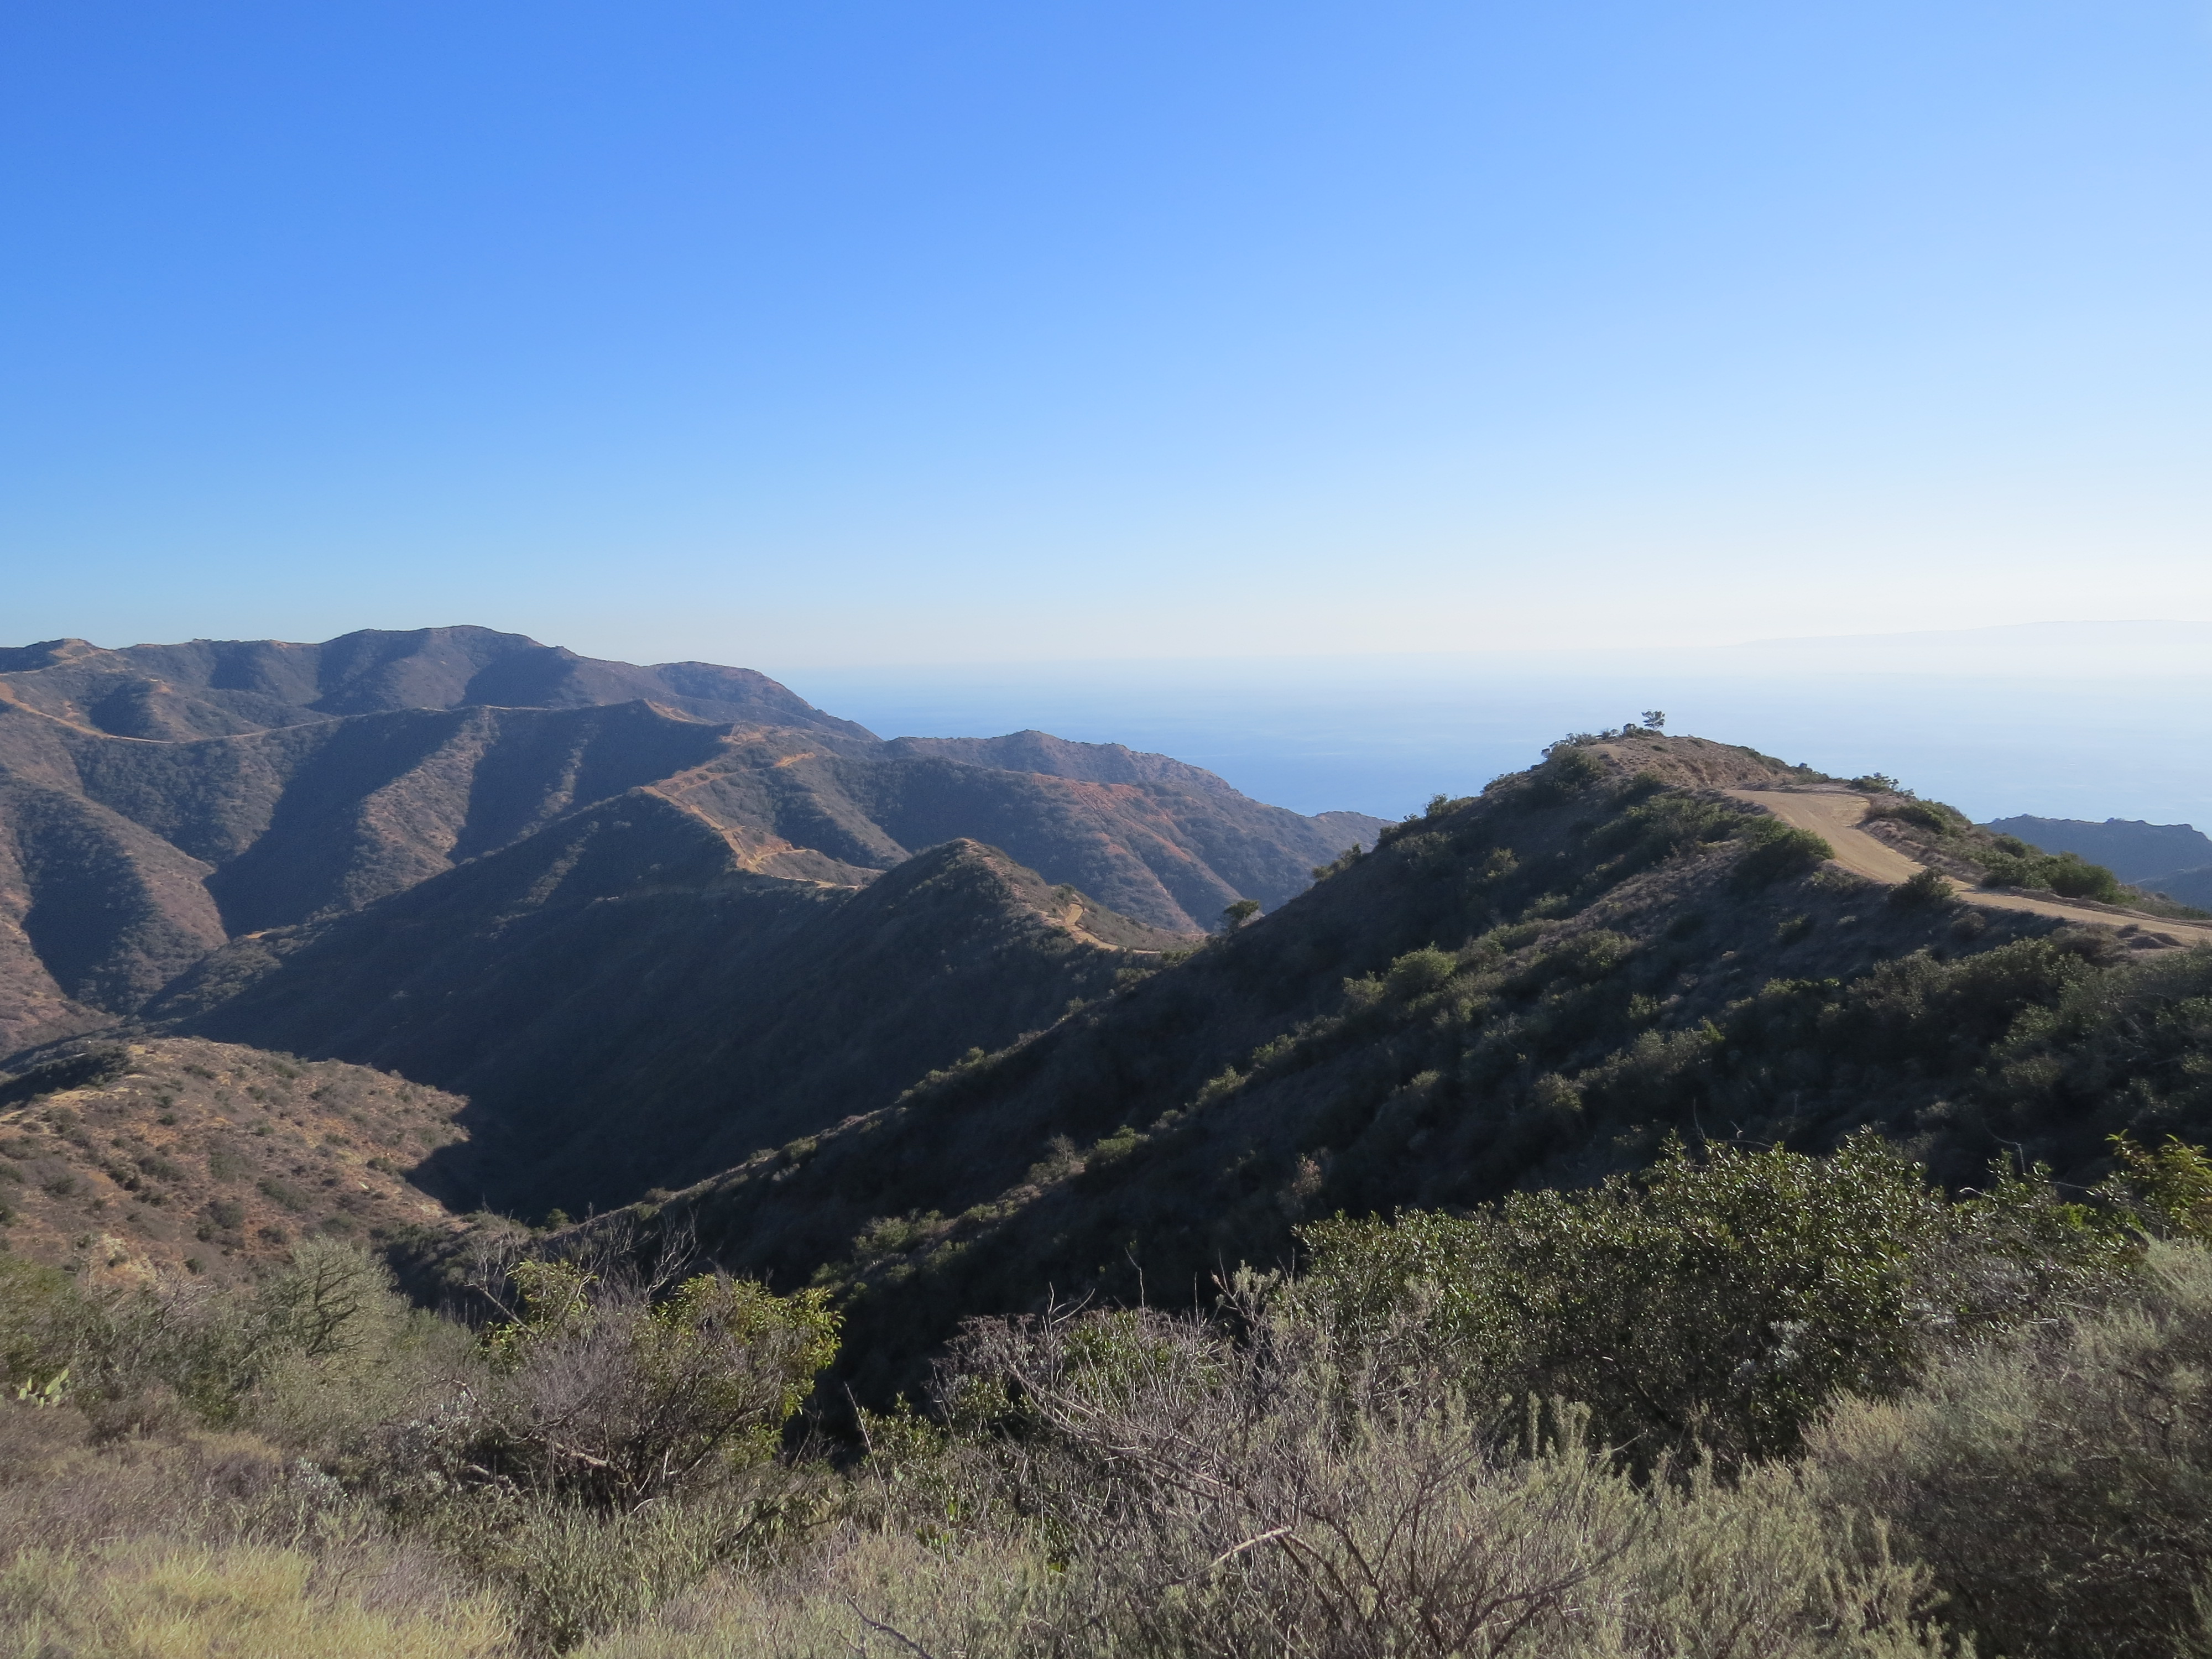 View of the hiking trails atop Catalina Island